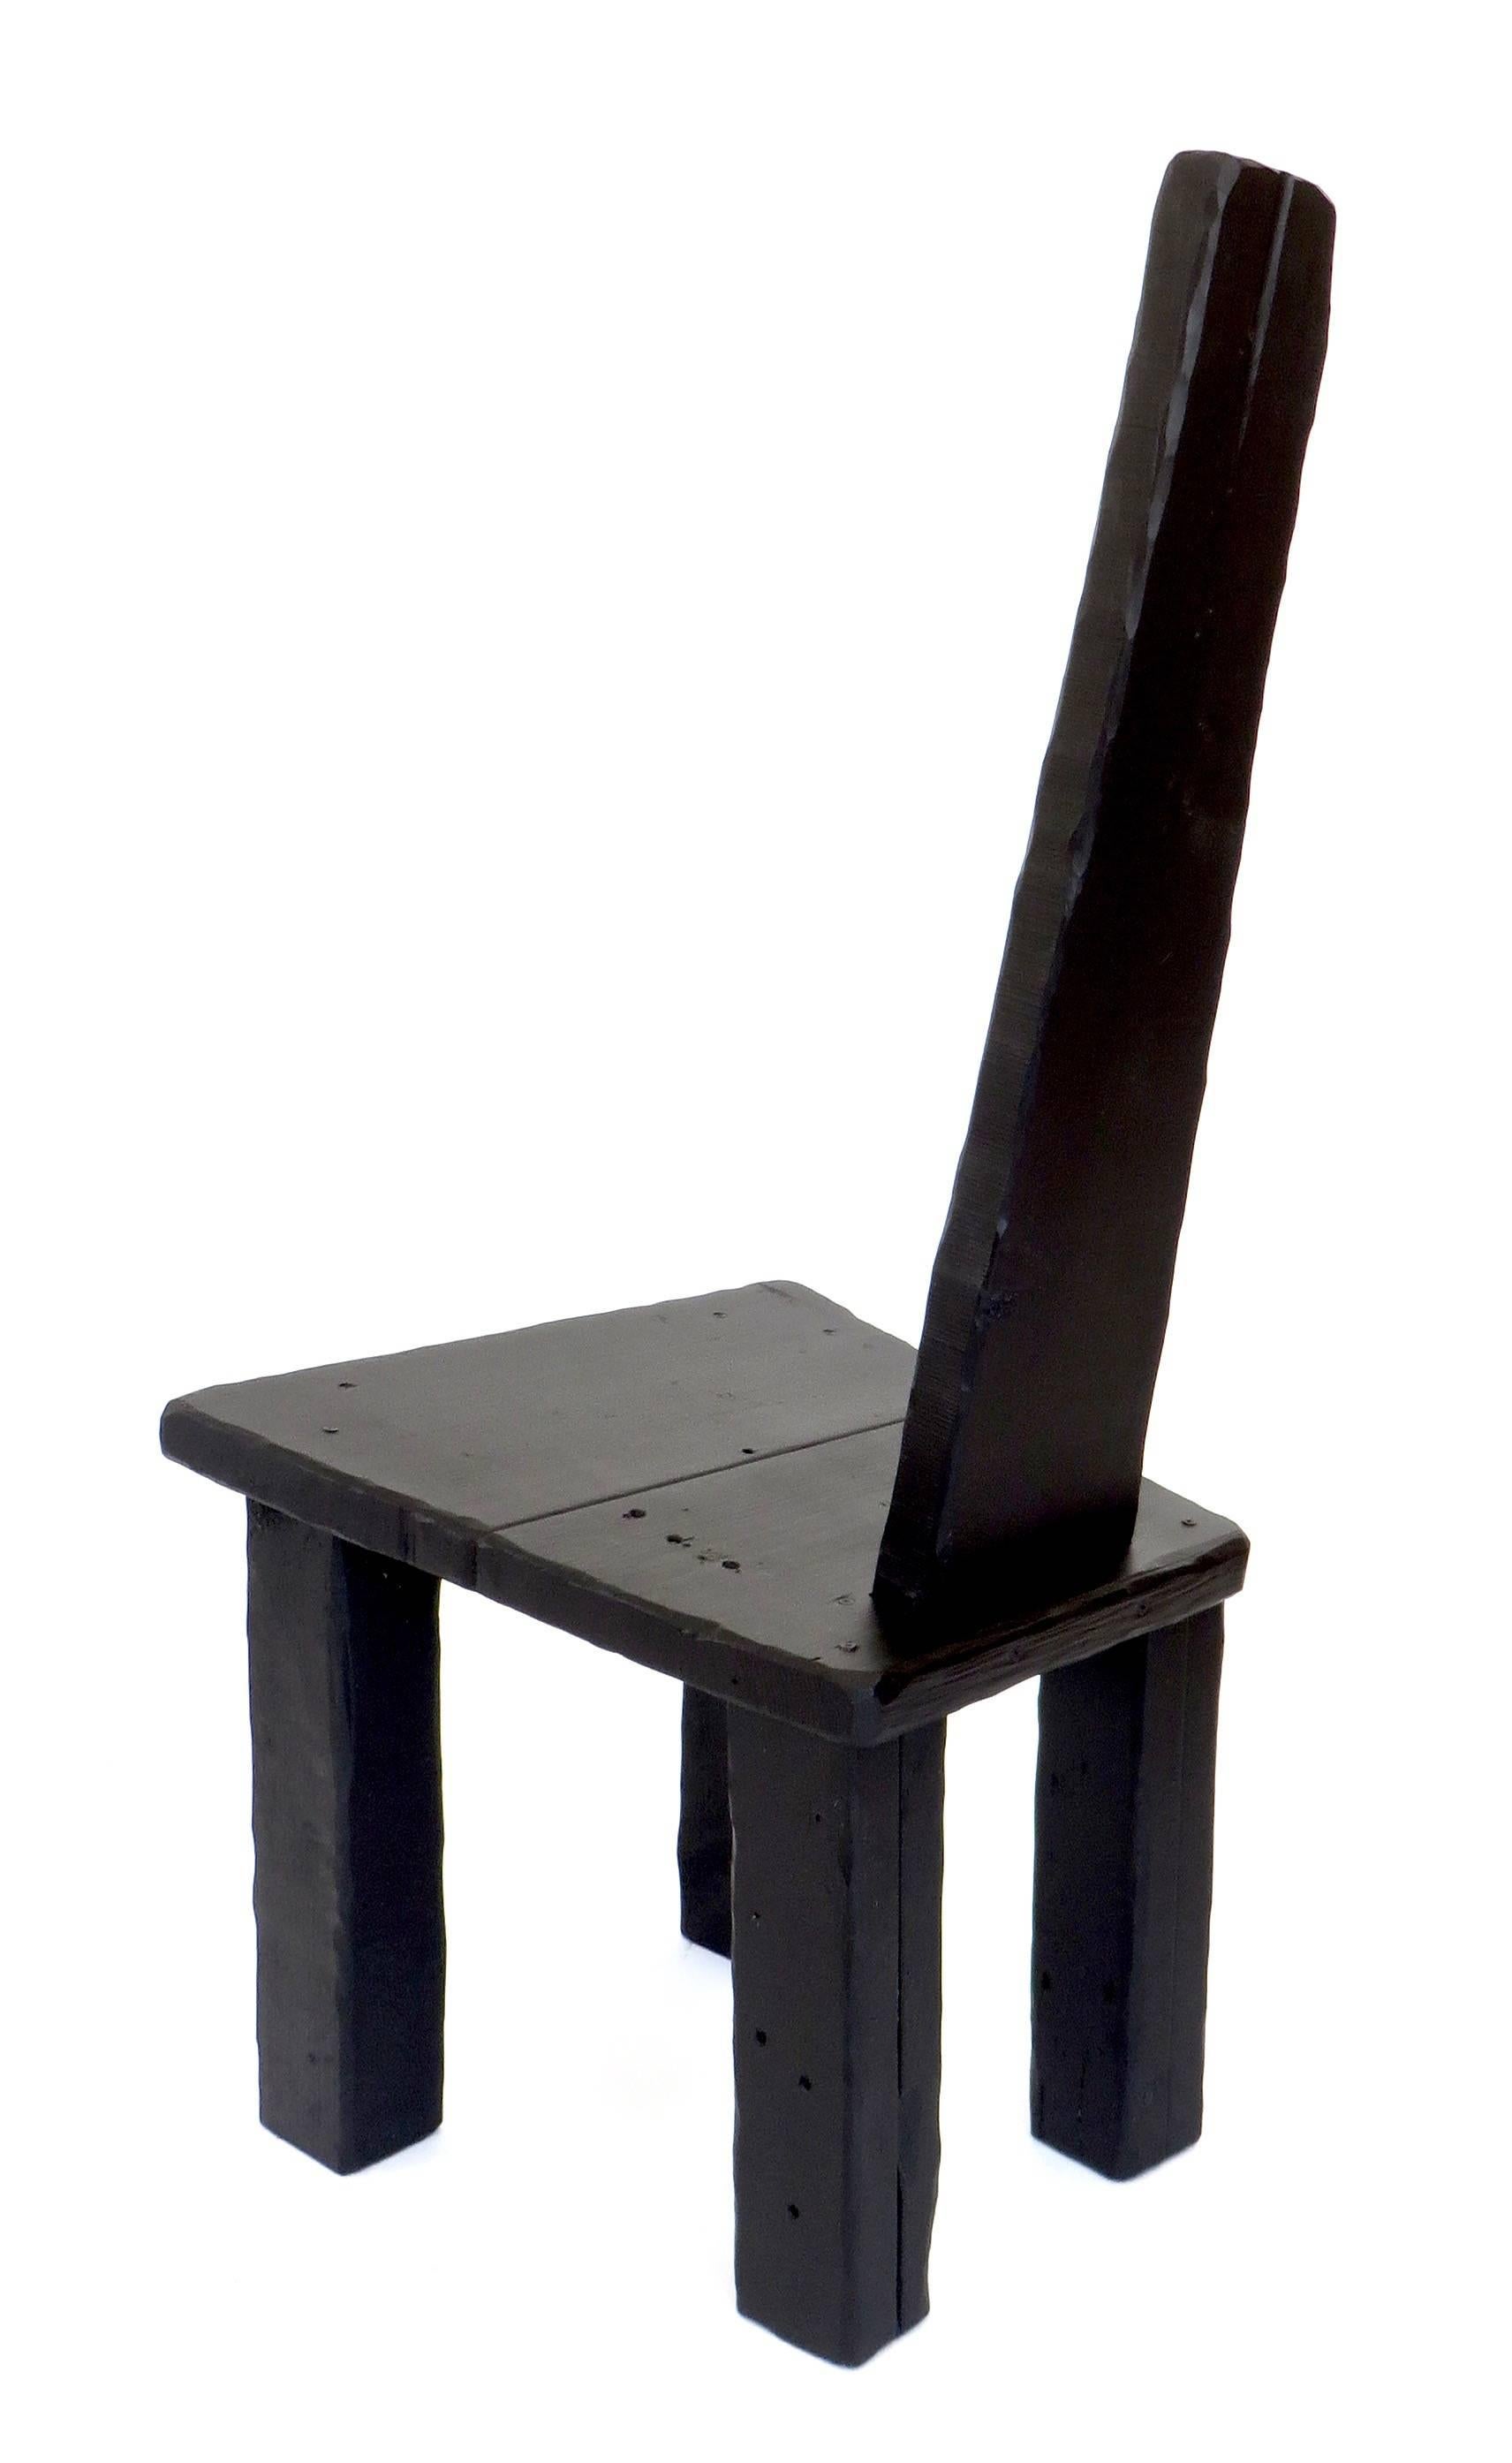 Blackened Contemporary Anthropological Collection Chair by Artist Hannah Vaughn, 2017